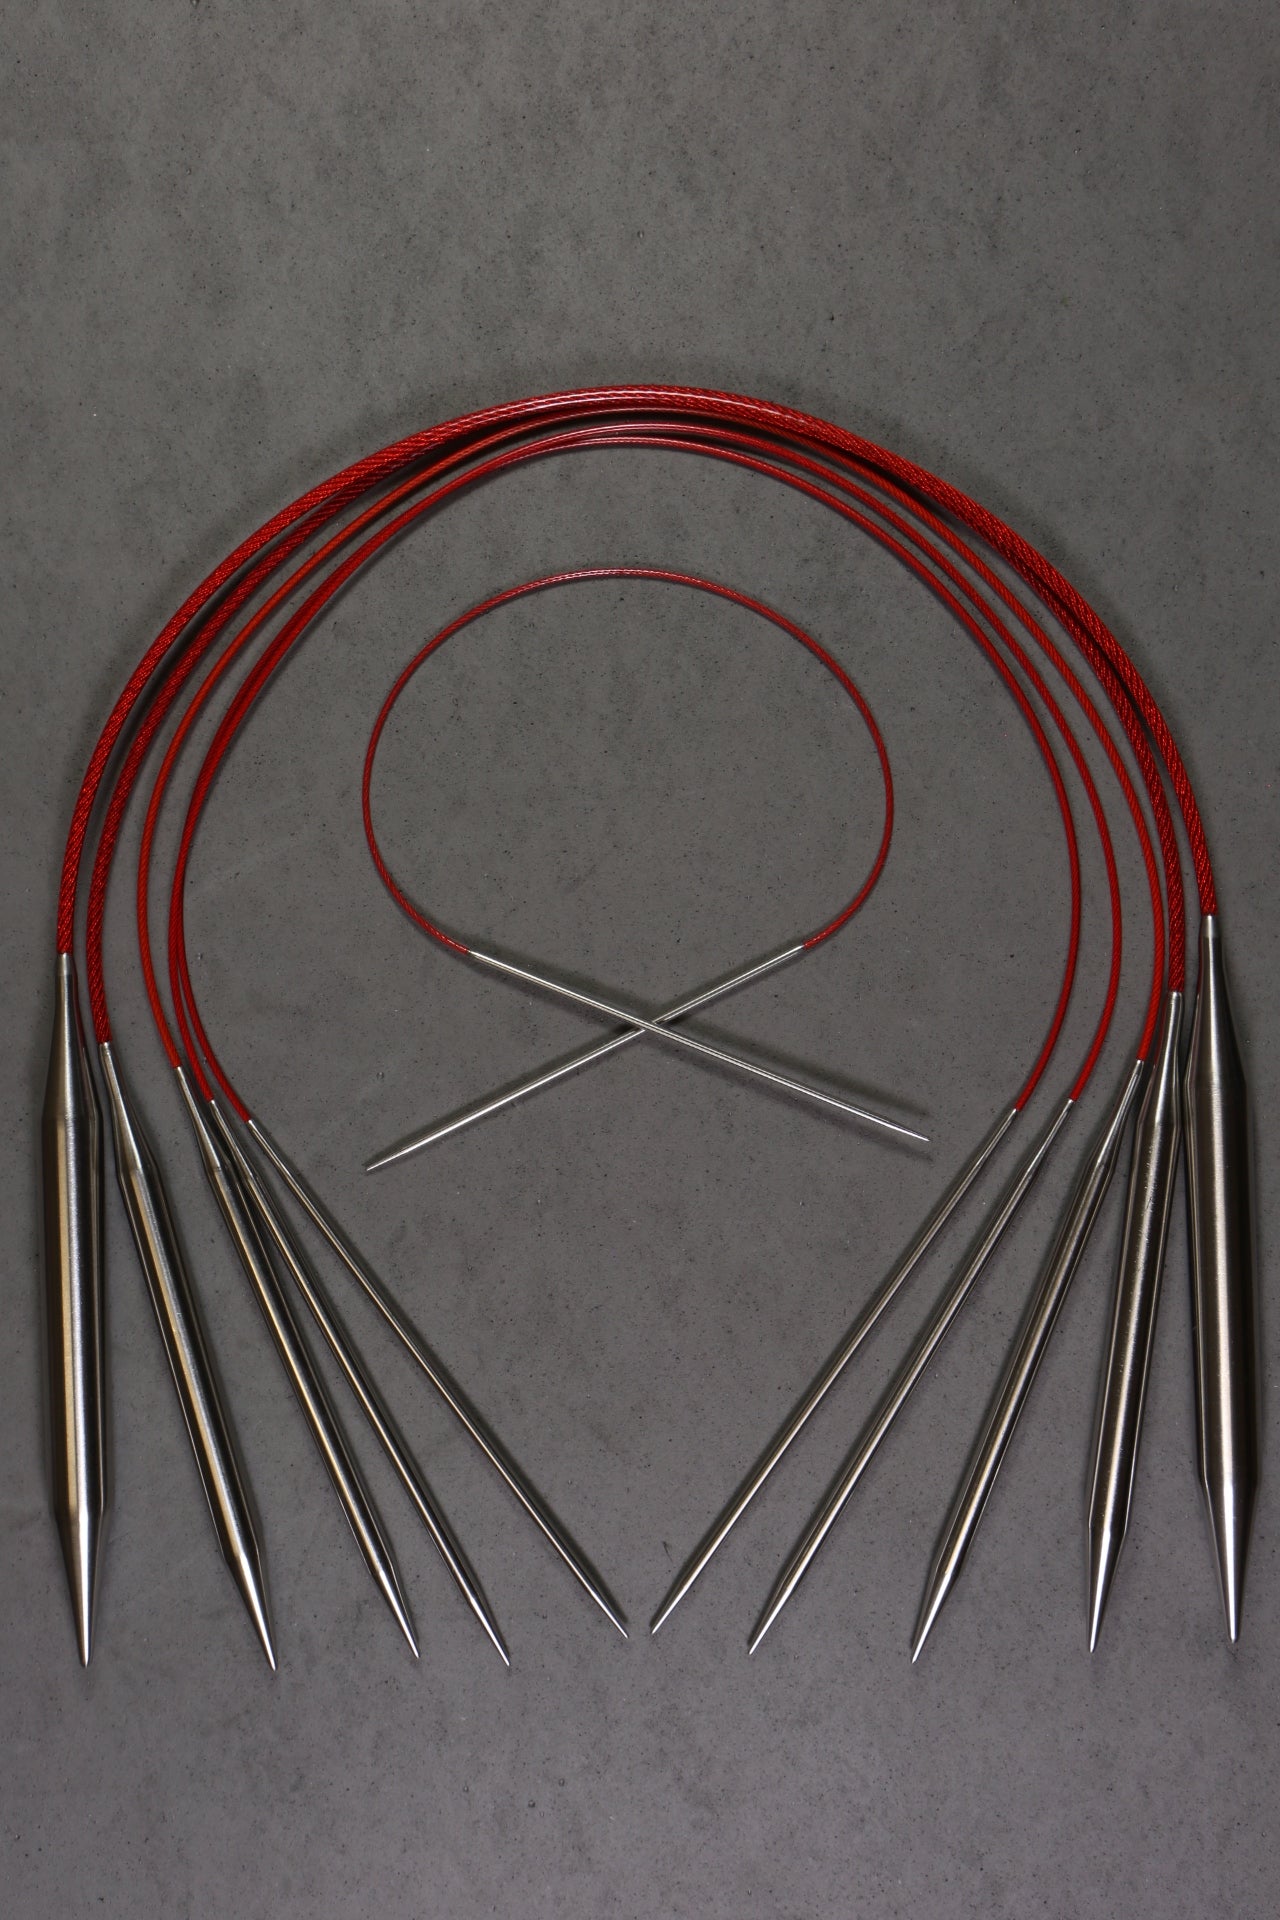 ChiaoGoo Red Lace Stainless Circular Knitting Needles 60